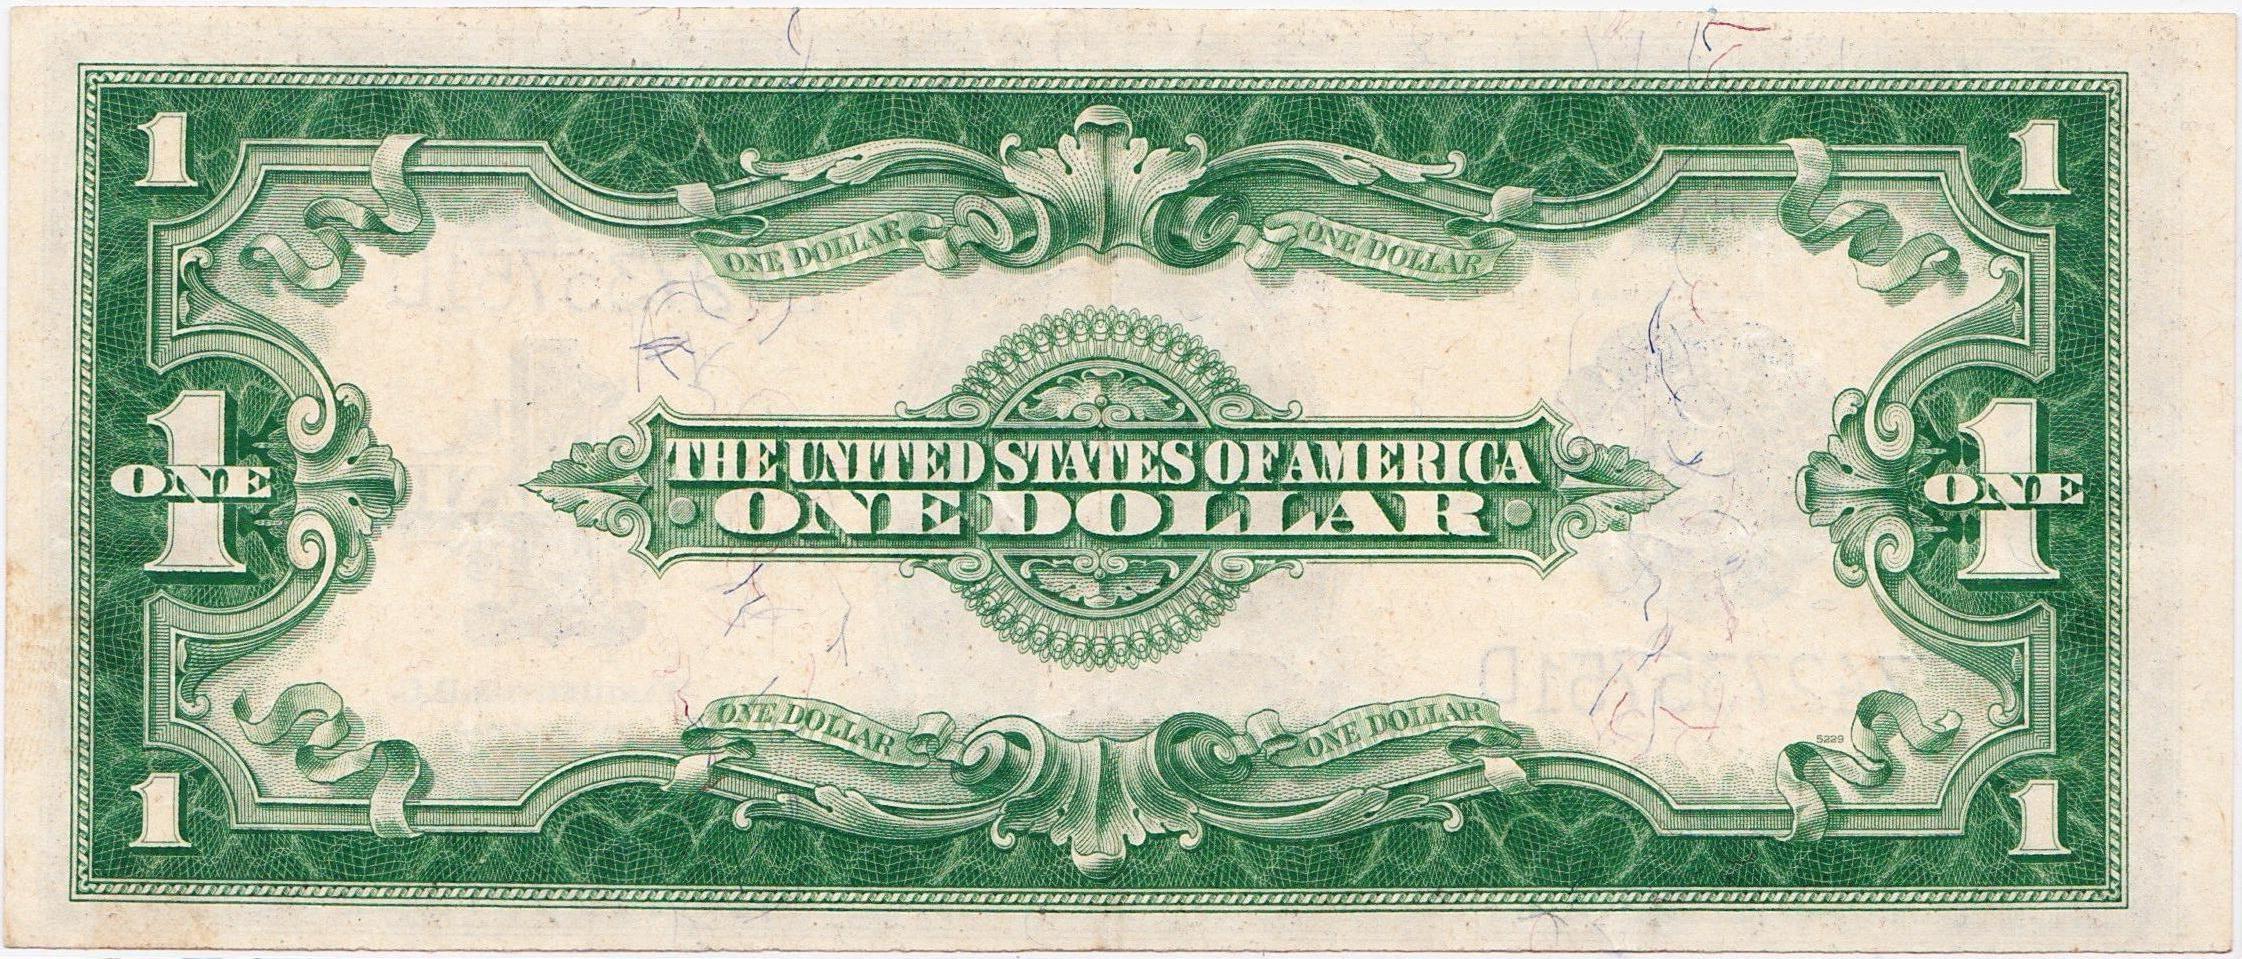 1923 U.S. large size $1 blue seal silver certificate banknote